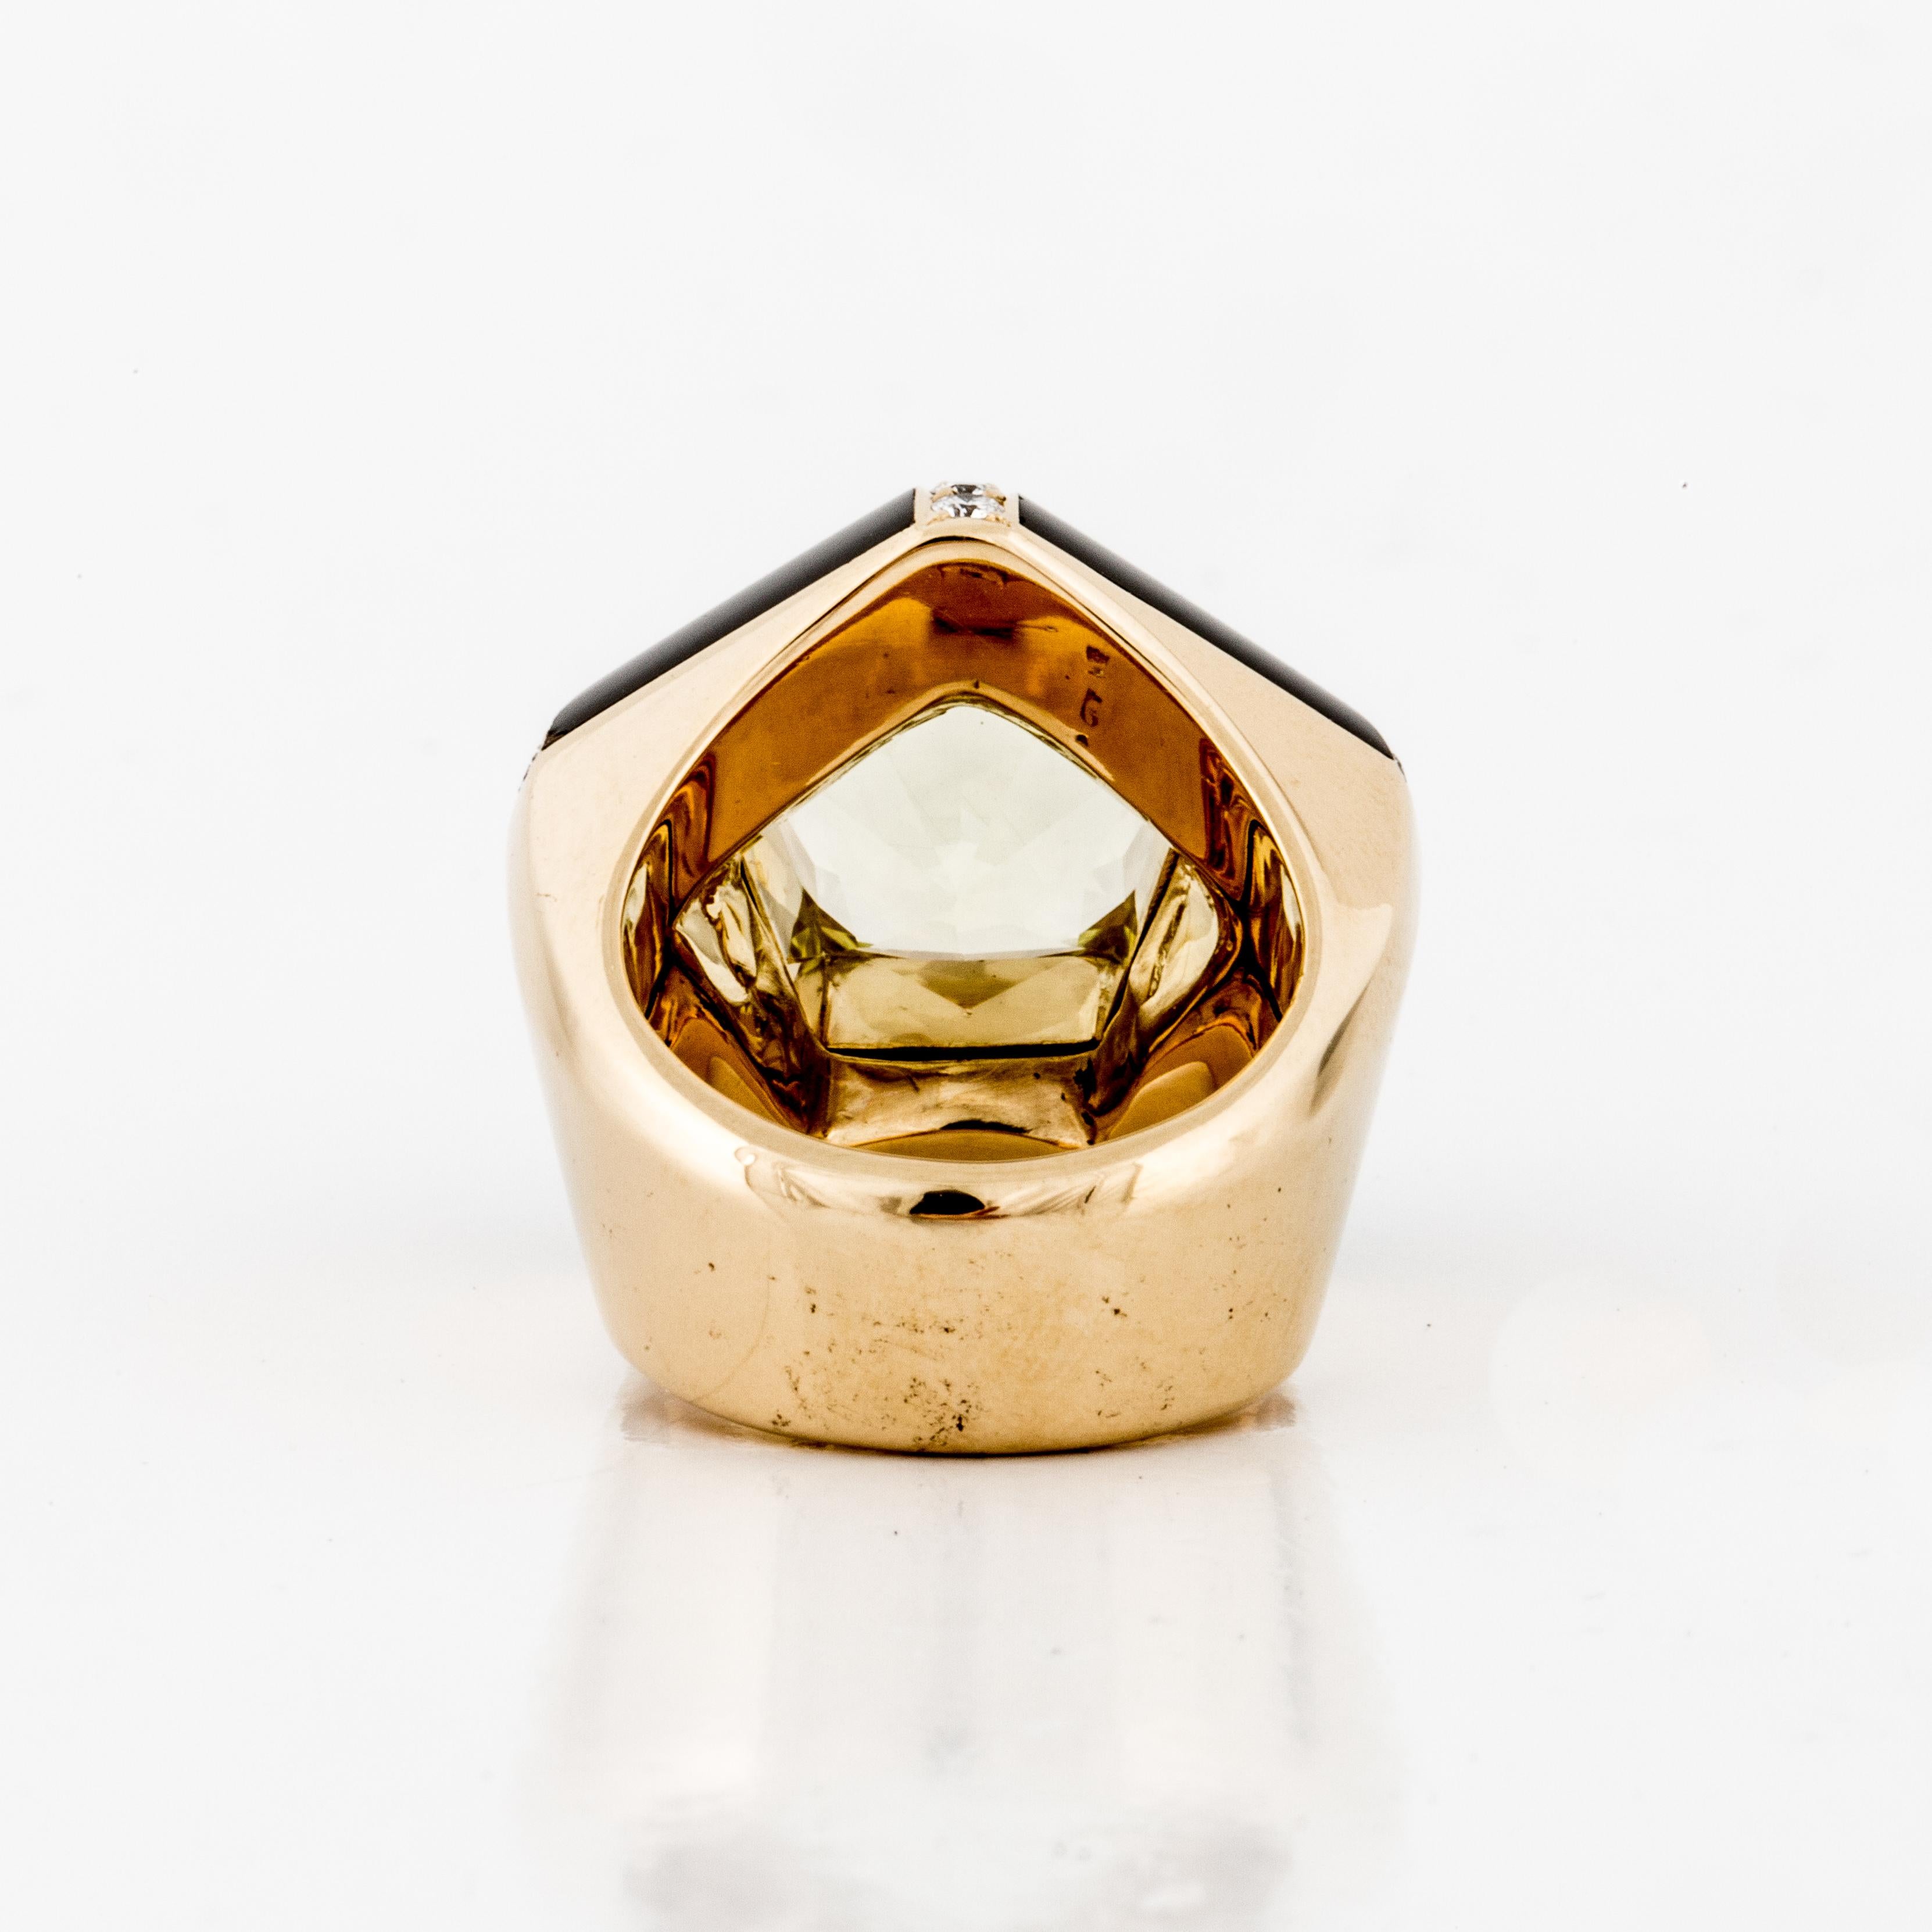  18K Gold Onyx and Citrine Pentagonal Ring In Good Condition For Sale In Houston, TX